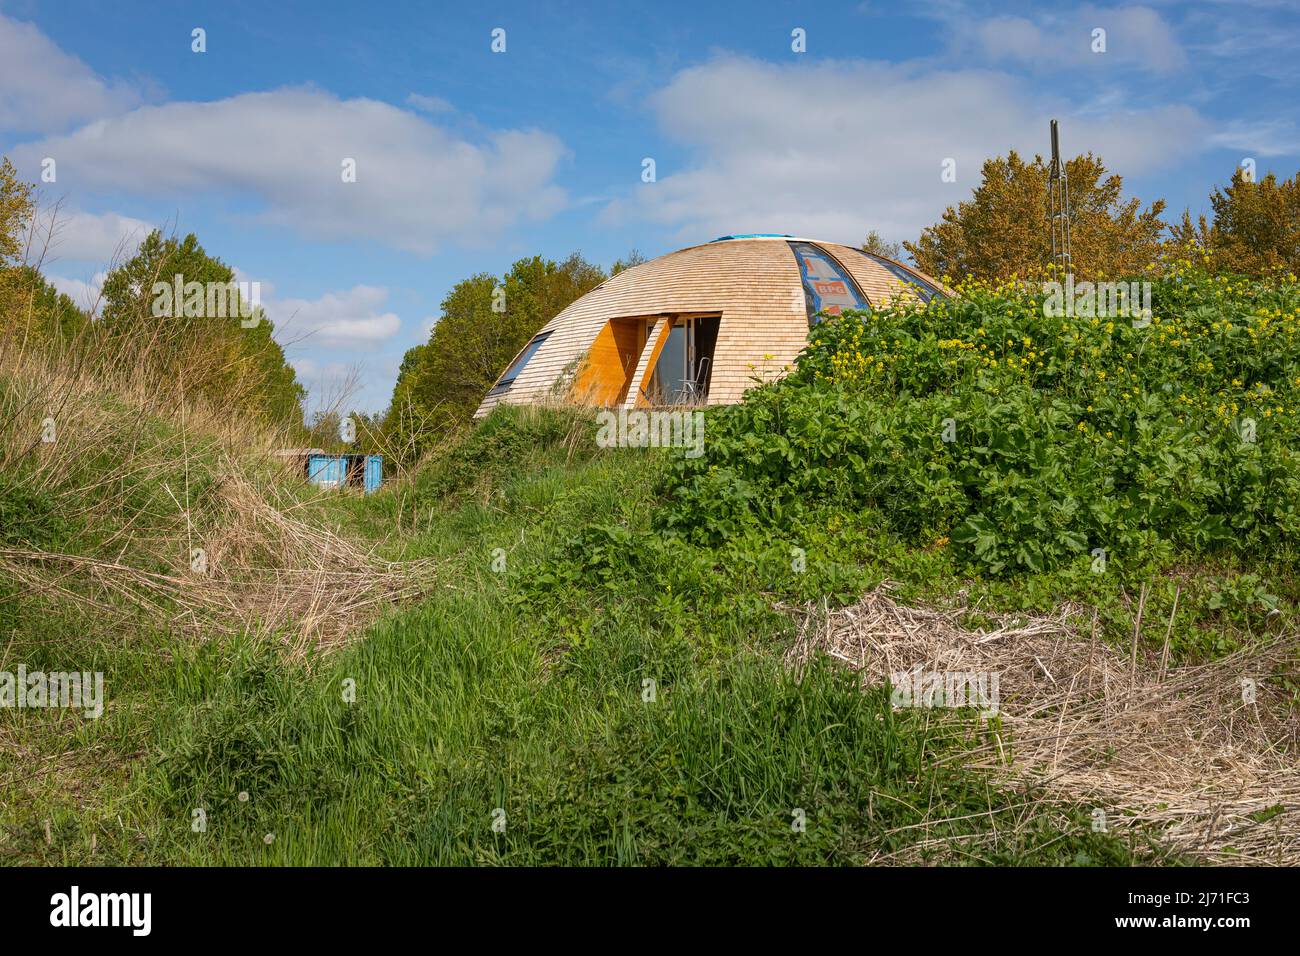 Dome shaped UFO eco friendly building in eco-village Oosterwold Almere in the Netherlands Stock Photo